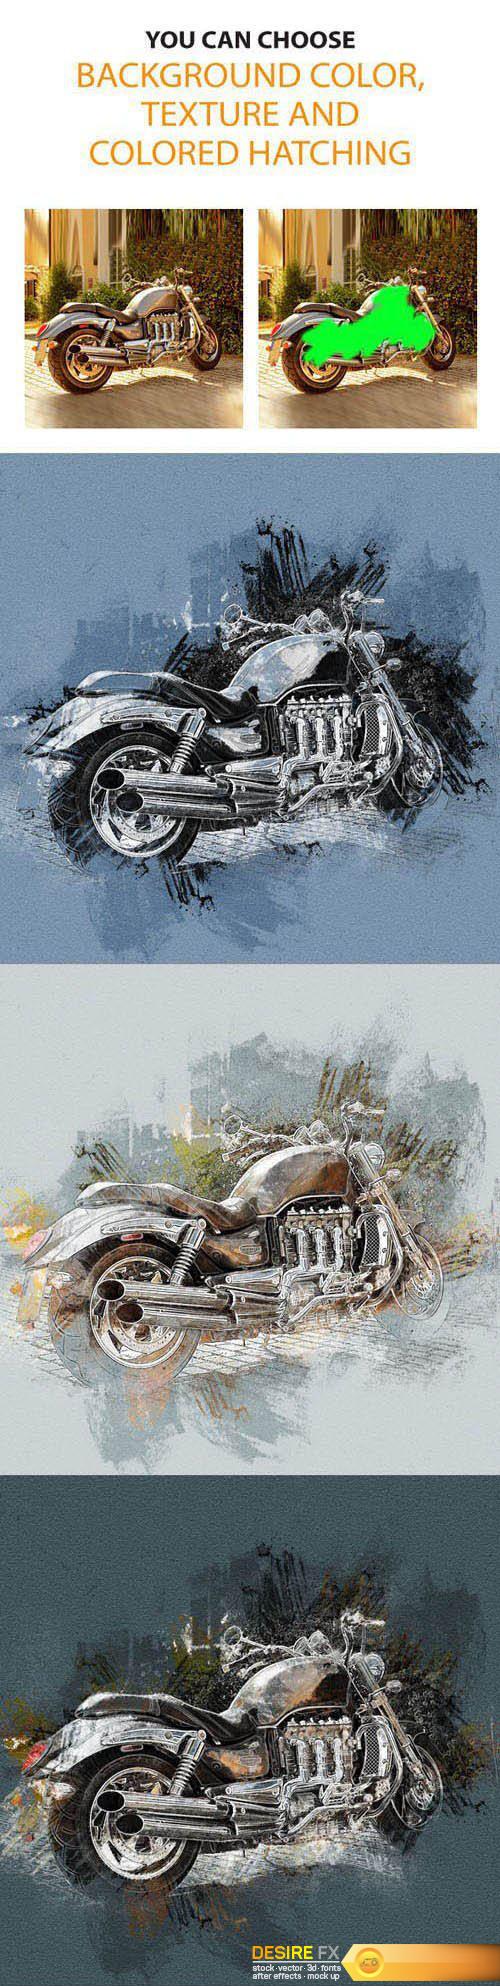 GraphicRiver – Sketch Charcoal and Chalk Photoshop Action